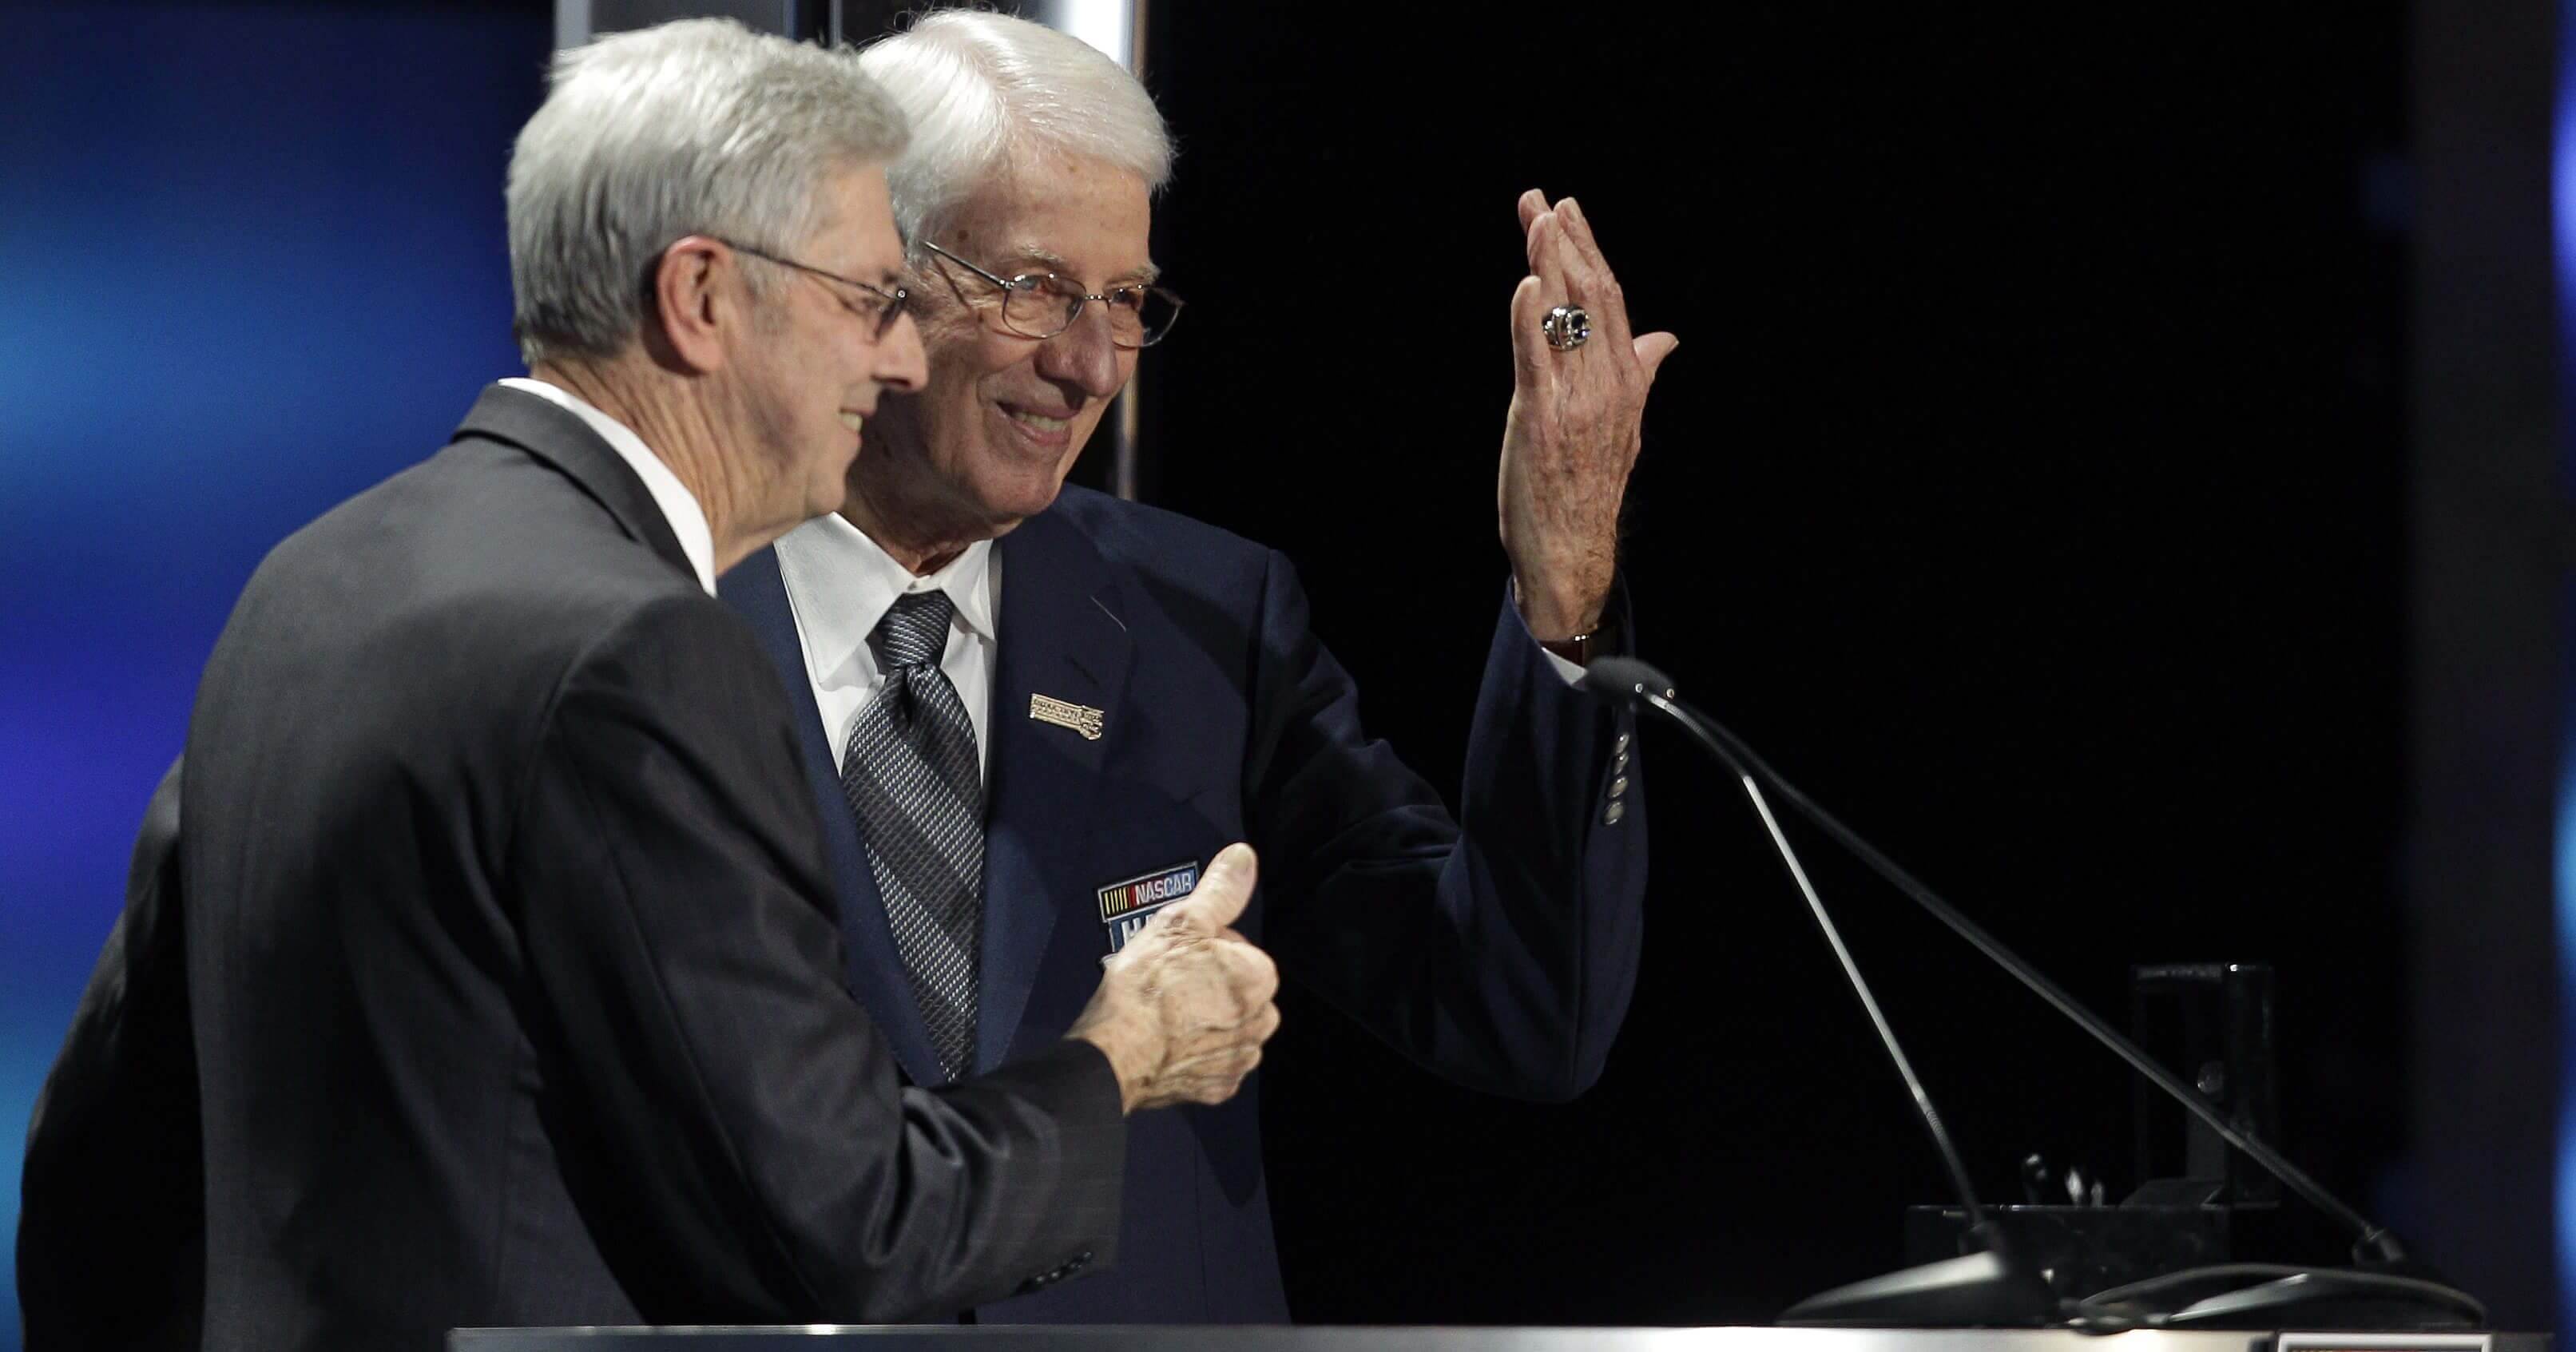 Glen Wood, right, shows off his induction ring as his brother, Leonard, left, looks on Jan. 20, 2012, during the NASCAR Hall of Fame induction ceremony in Charlotte, North Carolina.